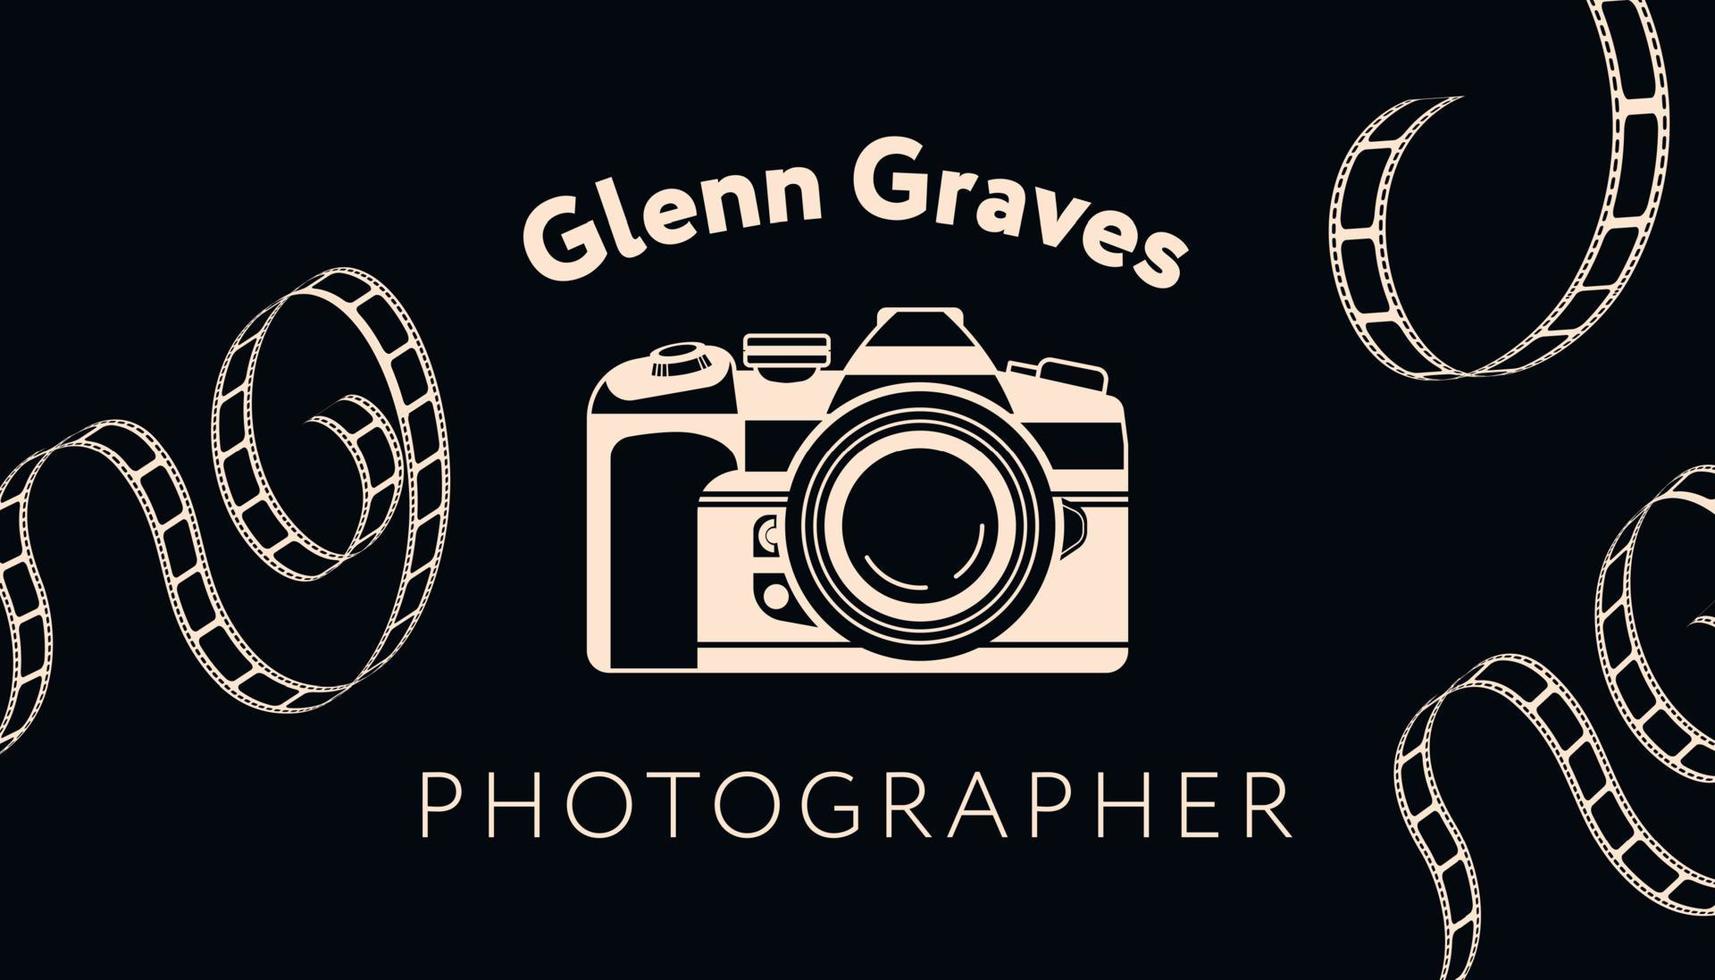 Photographer services, business card with name vector